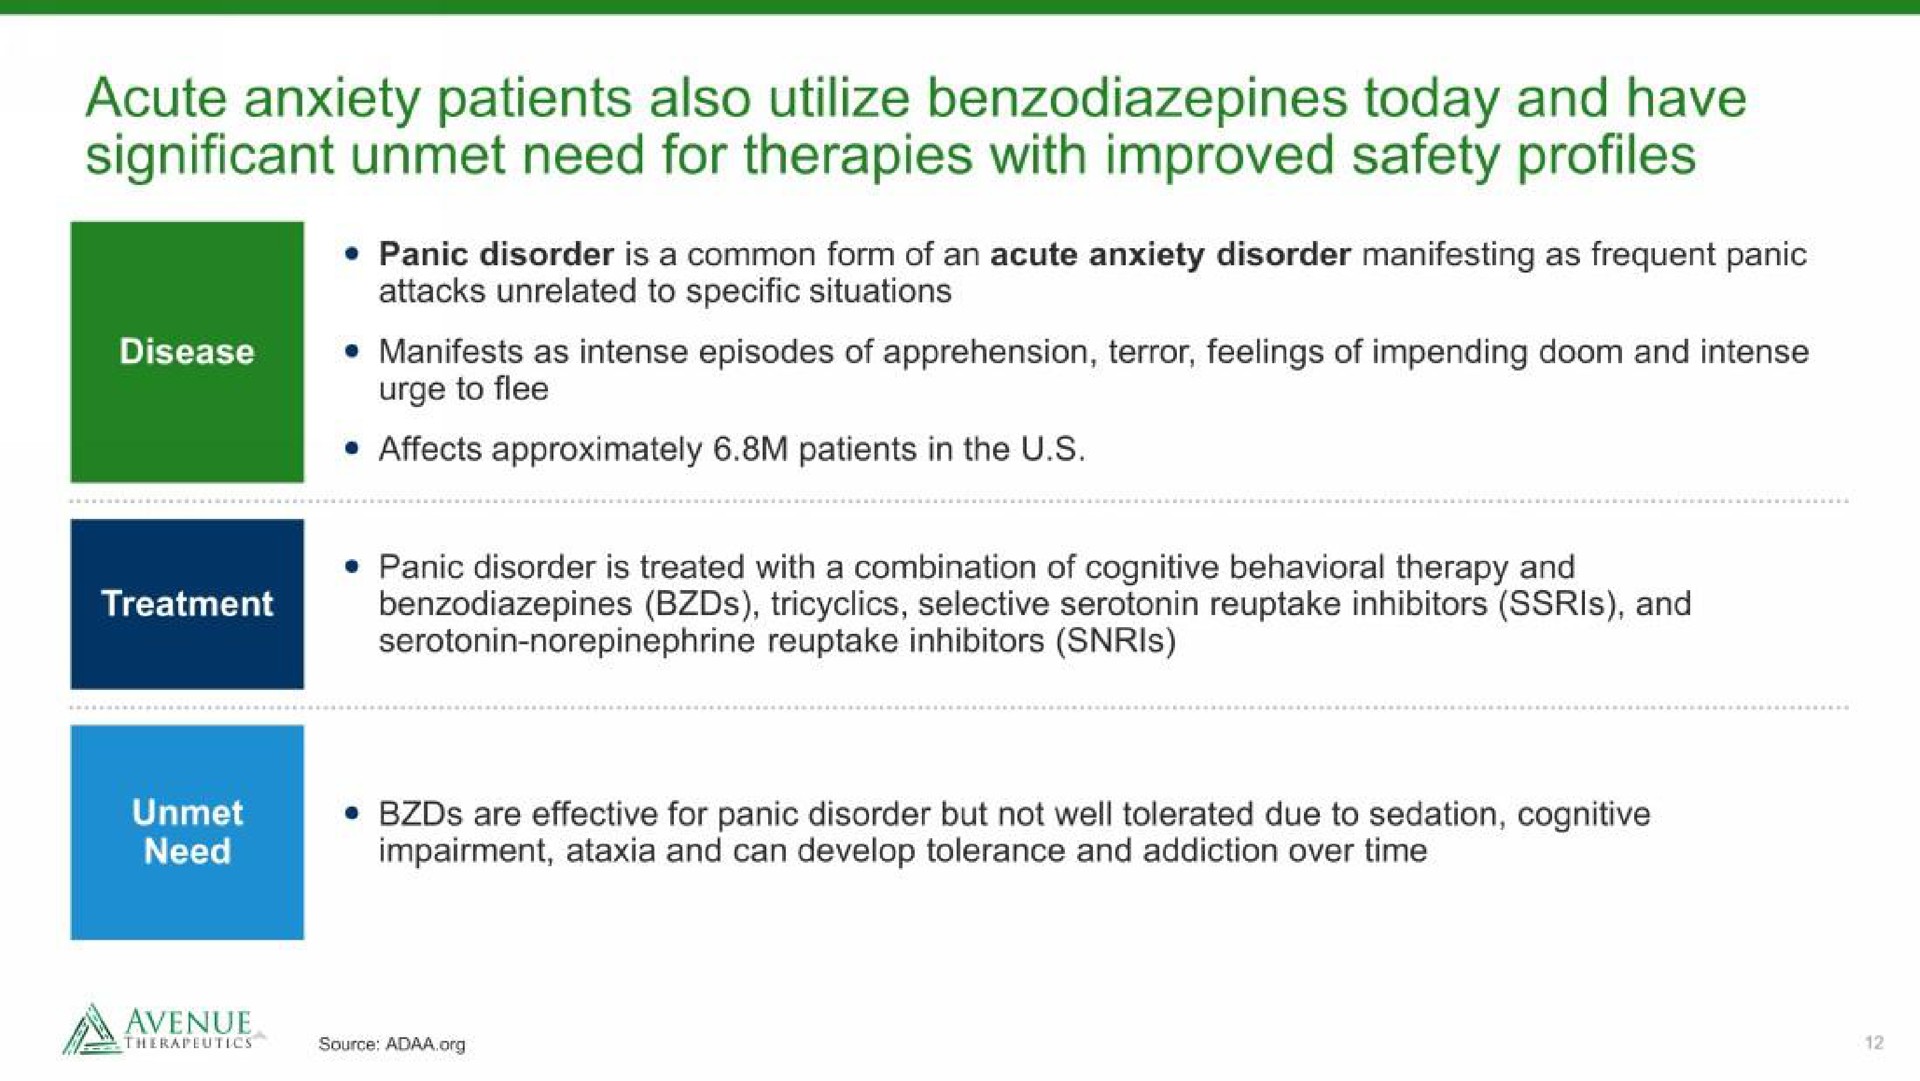 acute anxiety patients also utilize today and have significant unmet need for therapies with improved safety profiles | Avenue Therapeutics